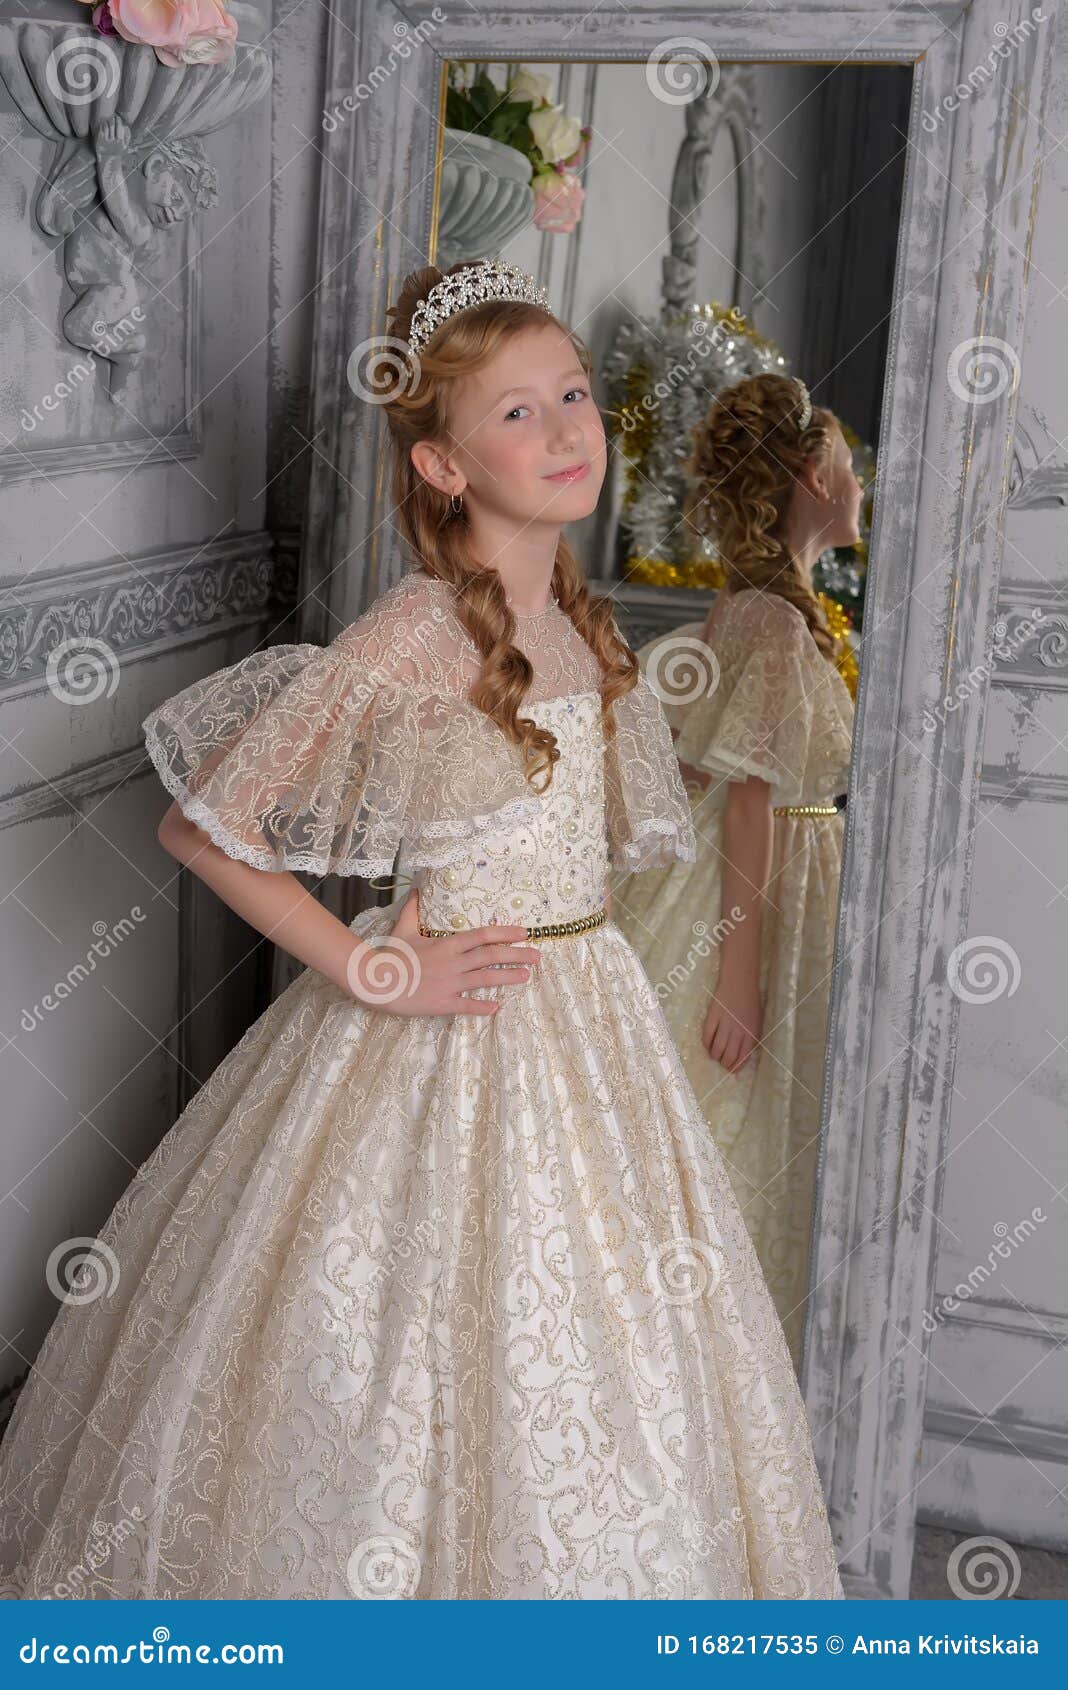 A Girl in a White Lace Dress with a Diadem in Her Hair, a Young Aristocrat,  a Ball Gown, Trying on a Dress in Front of a Mirror Stock Image - Image